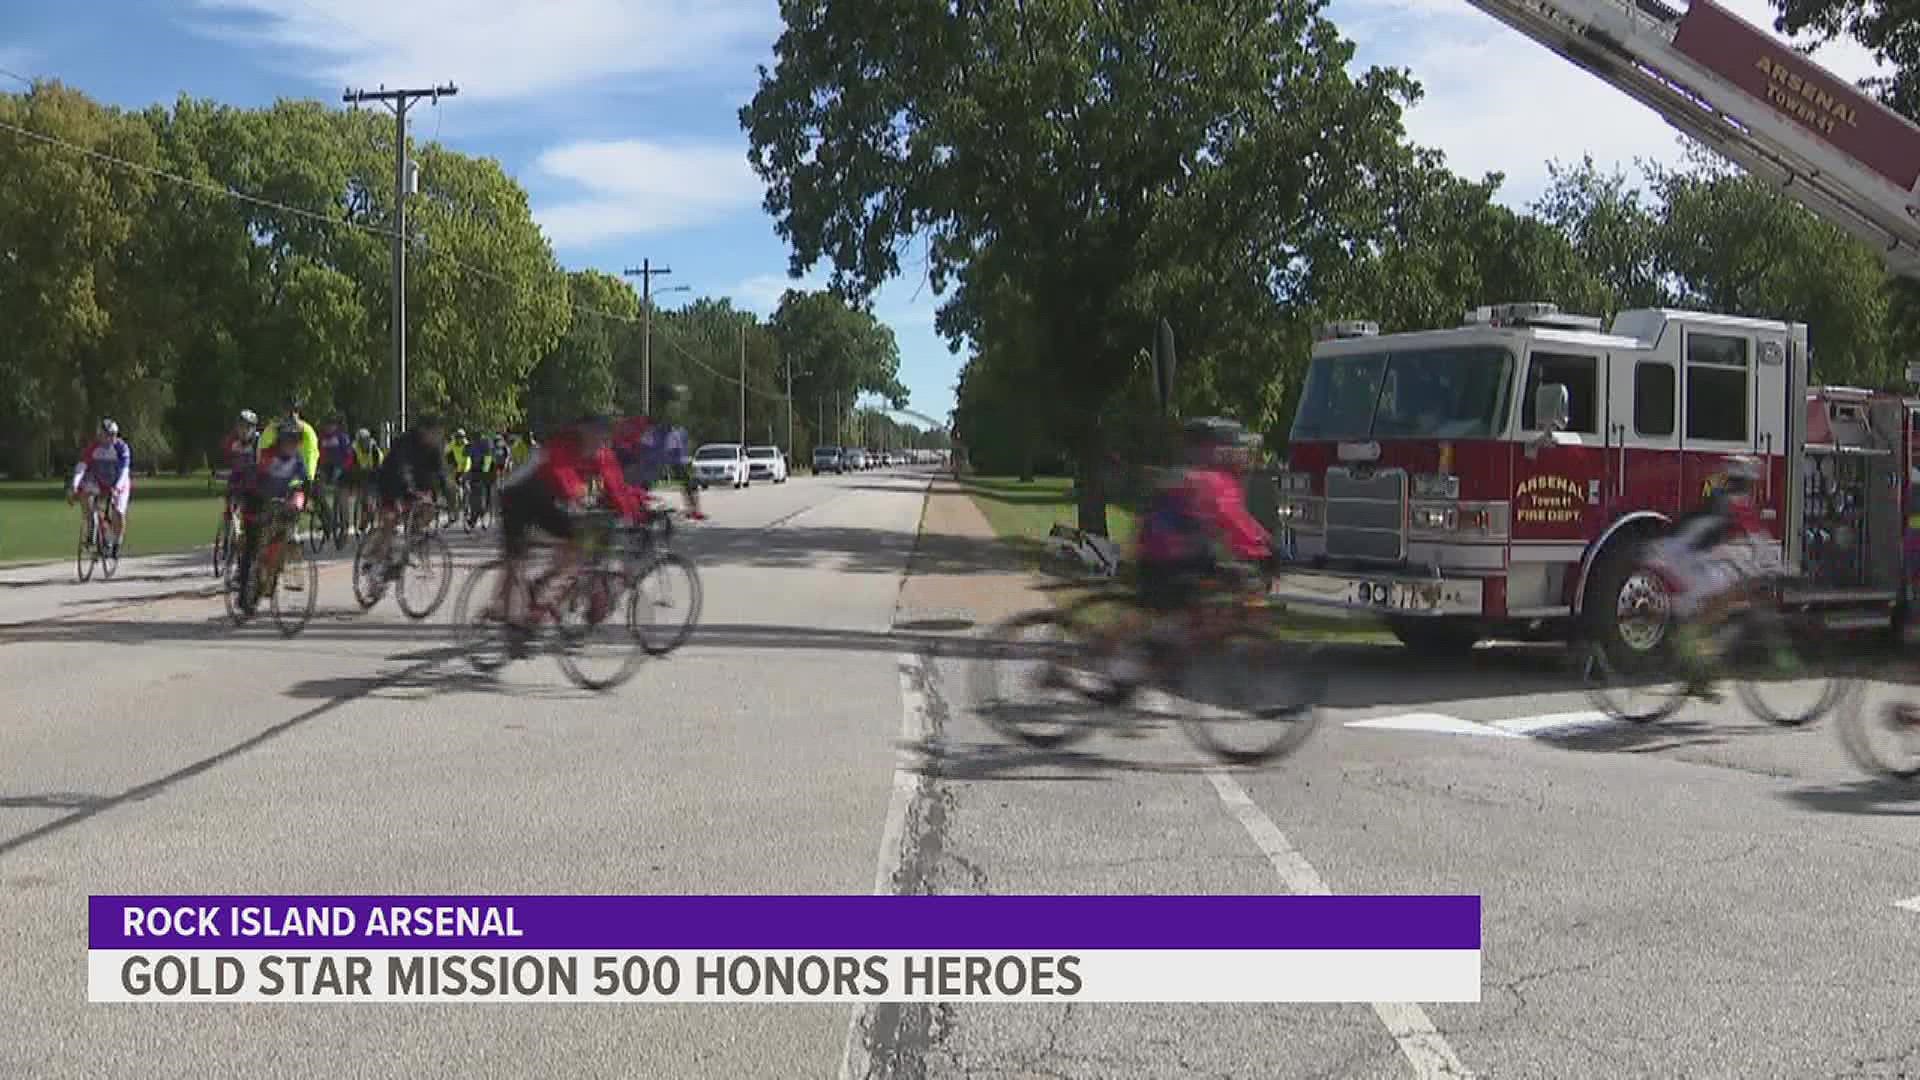 30 bicyclists made a stop at the Arsenal as part of the Gold Star Mission 500, a long bike ride honoring servicemembers who died in the line of duty.